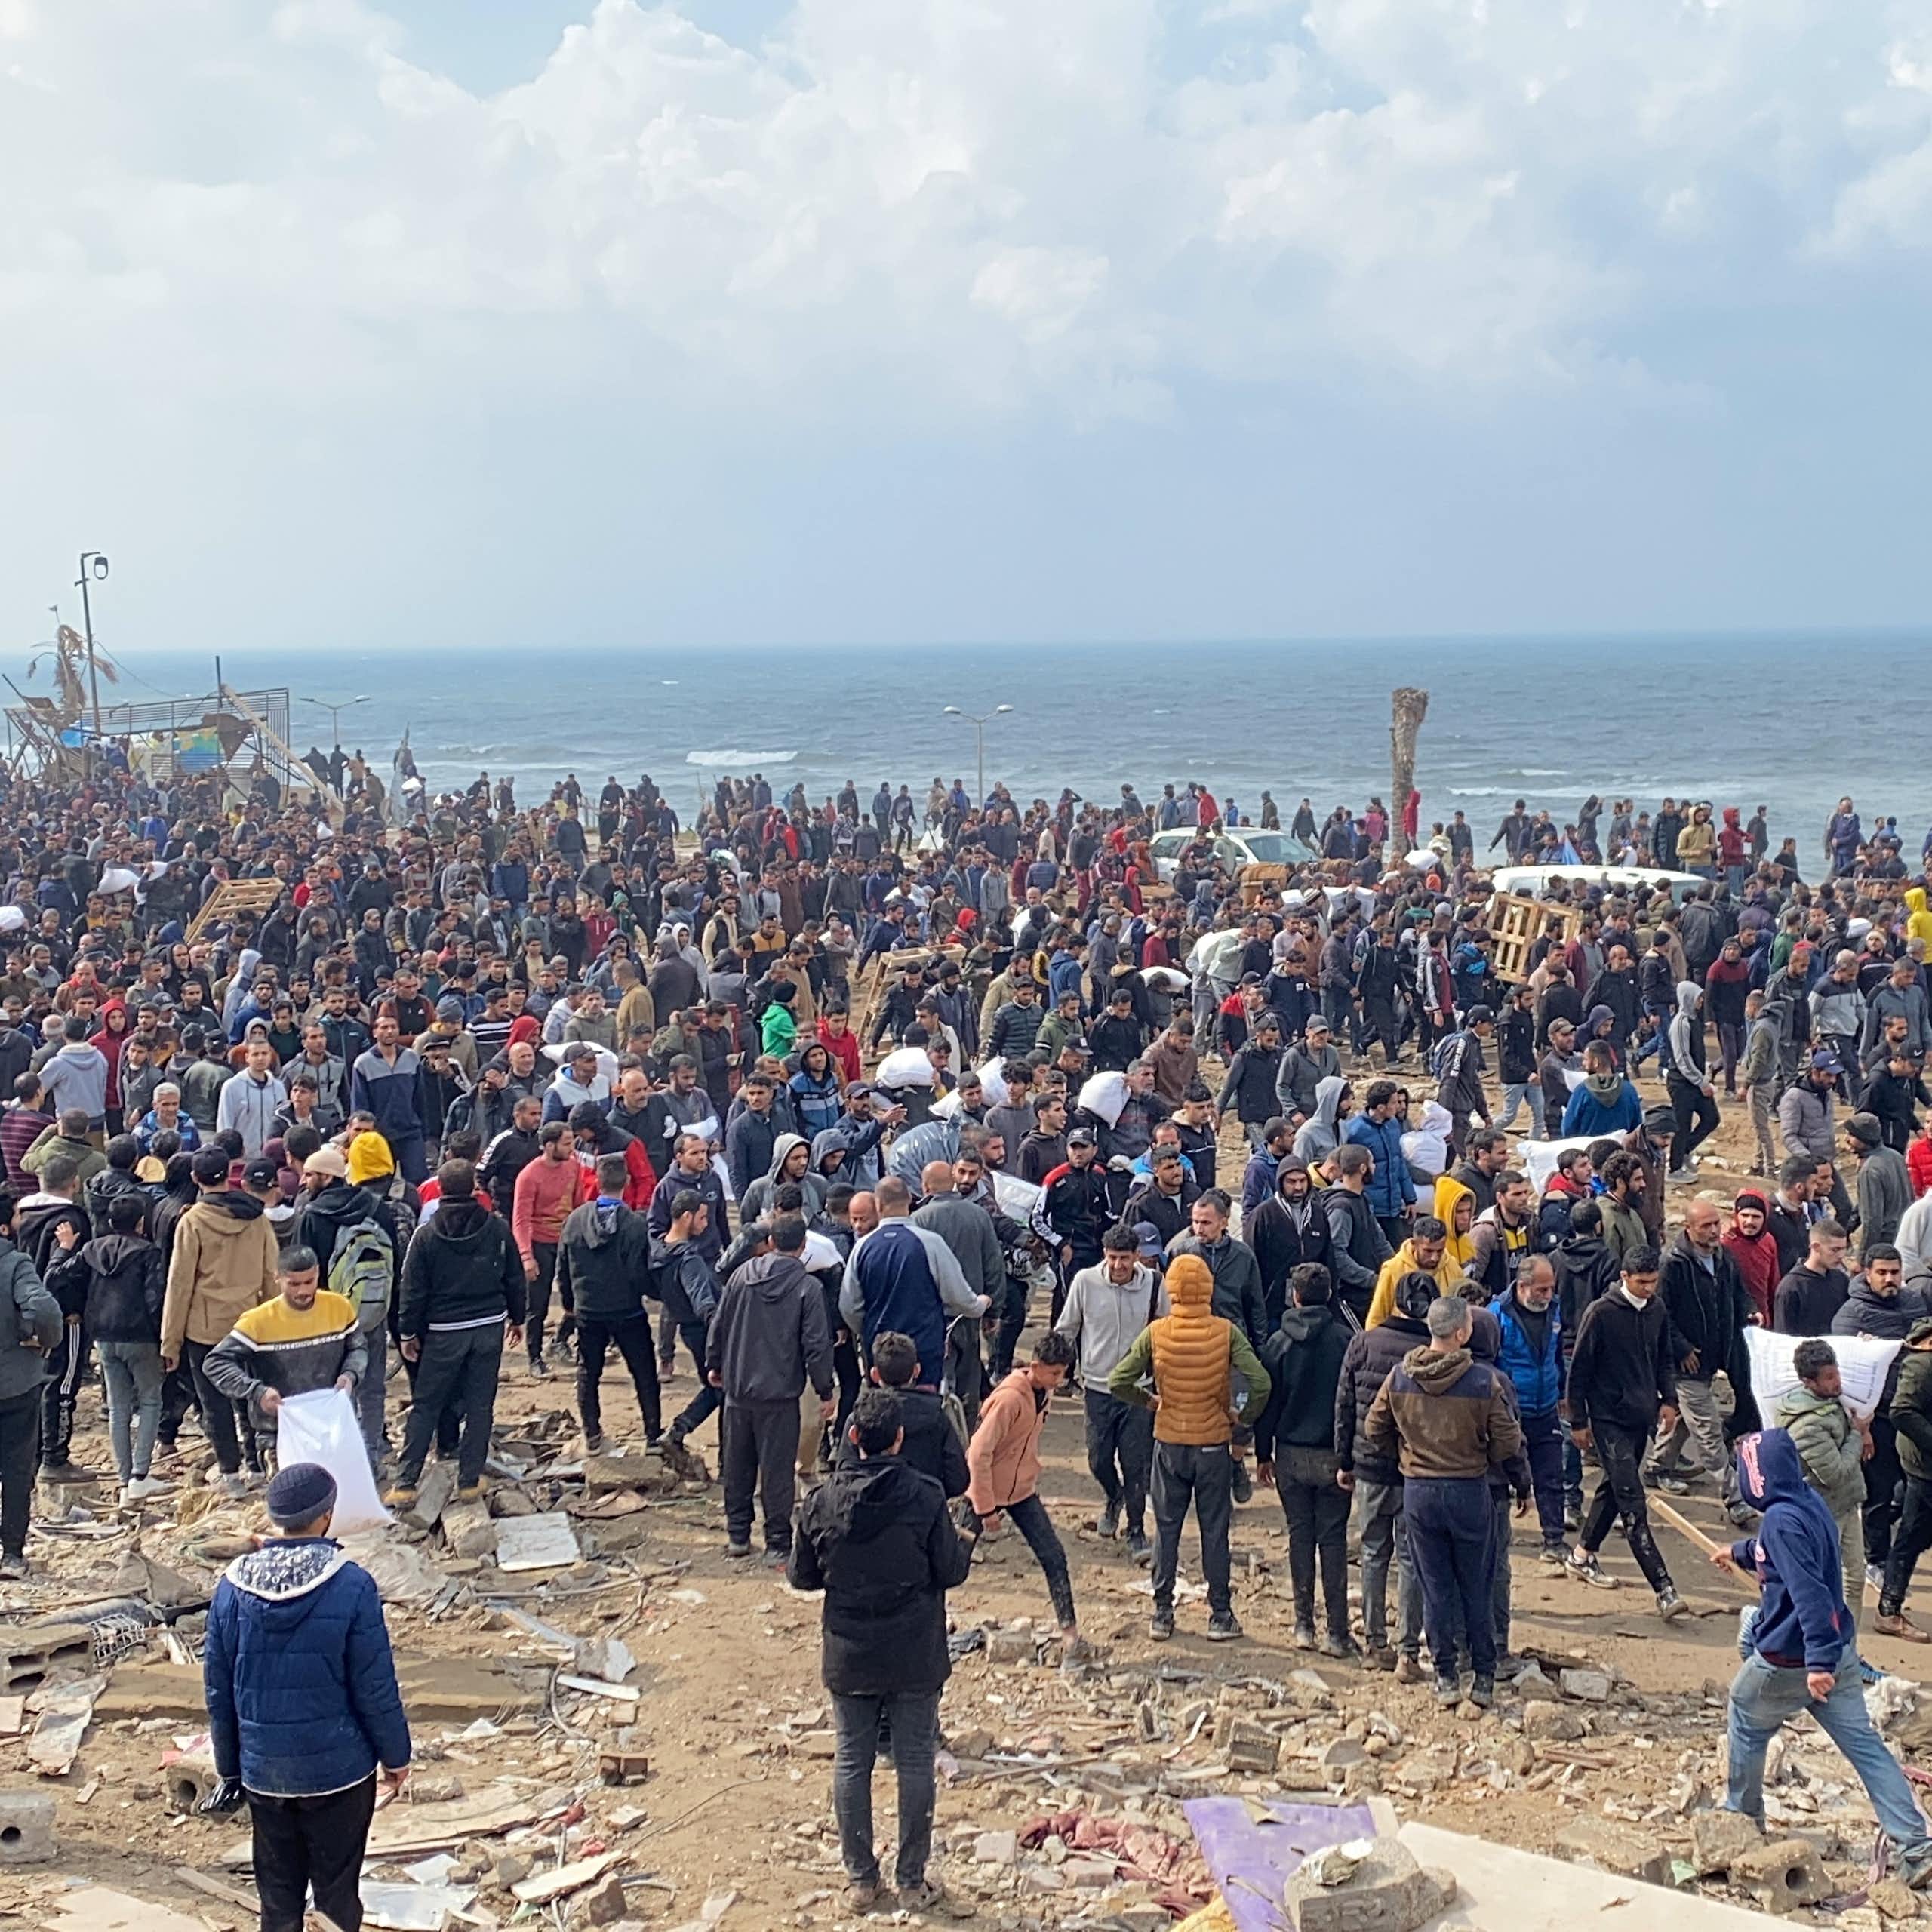 Hundreds of people gathered at a beach, which has rubble scattered around.